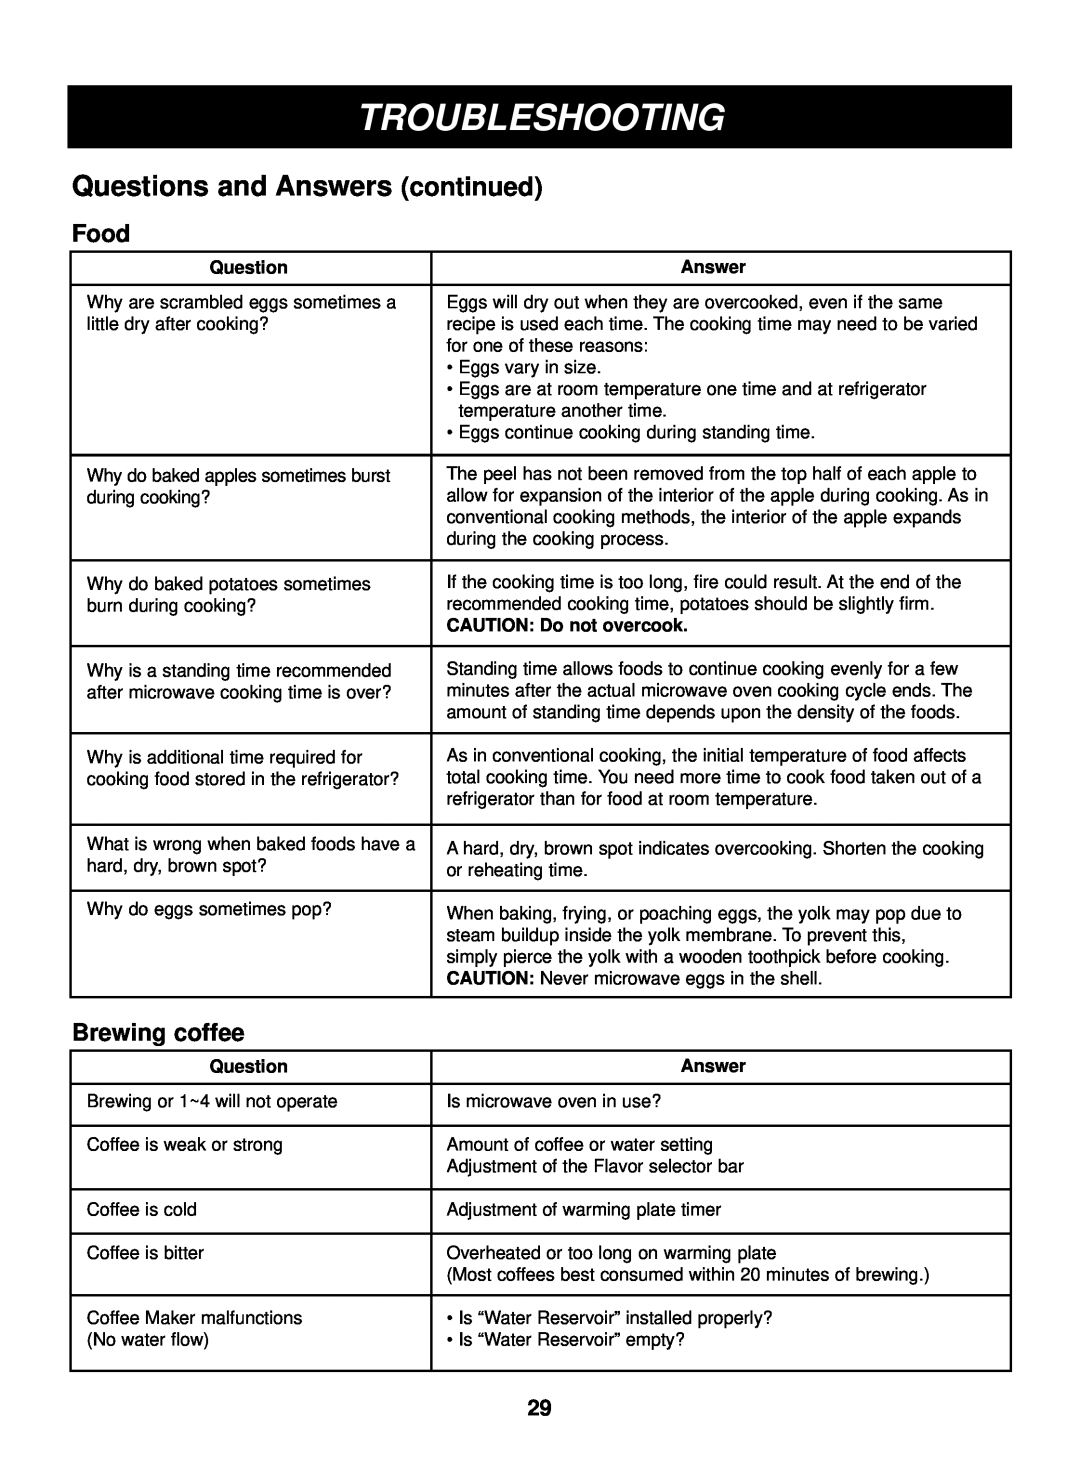 LG Electronics LCRM1240SW manual Questions and Answers continued, Food, Brewing coffee, Troubleshooting 